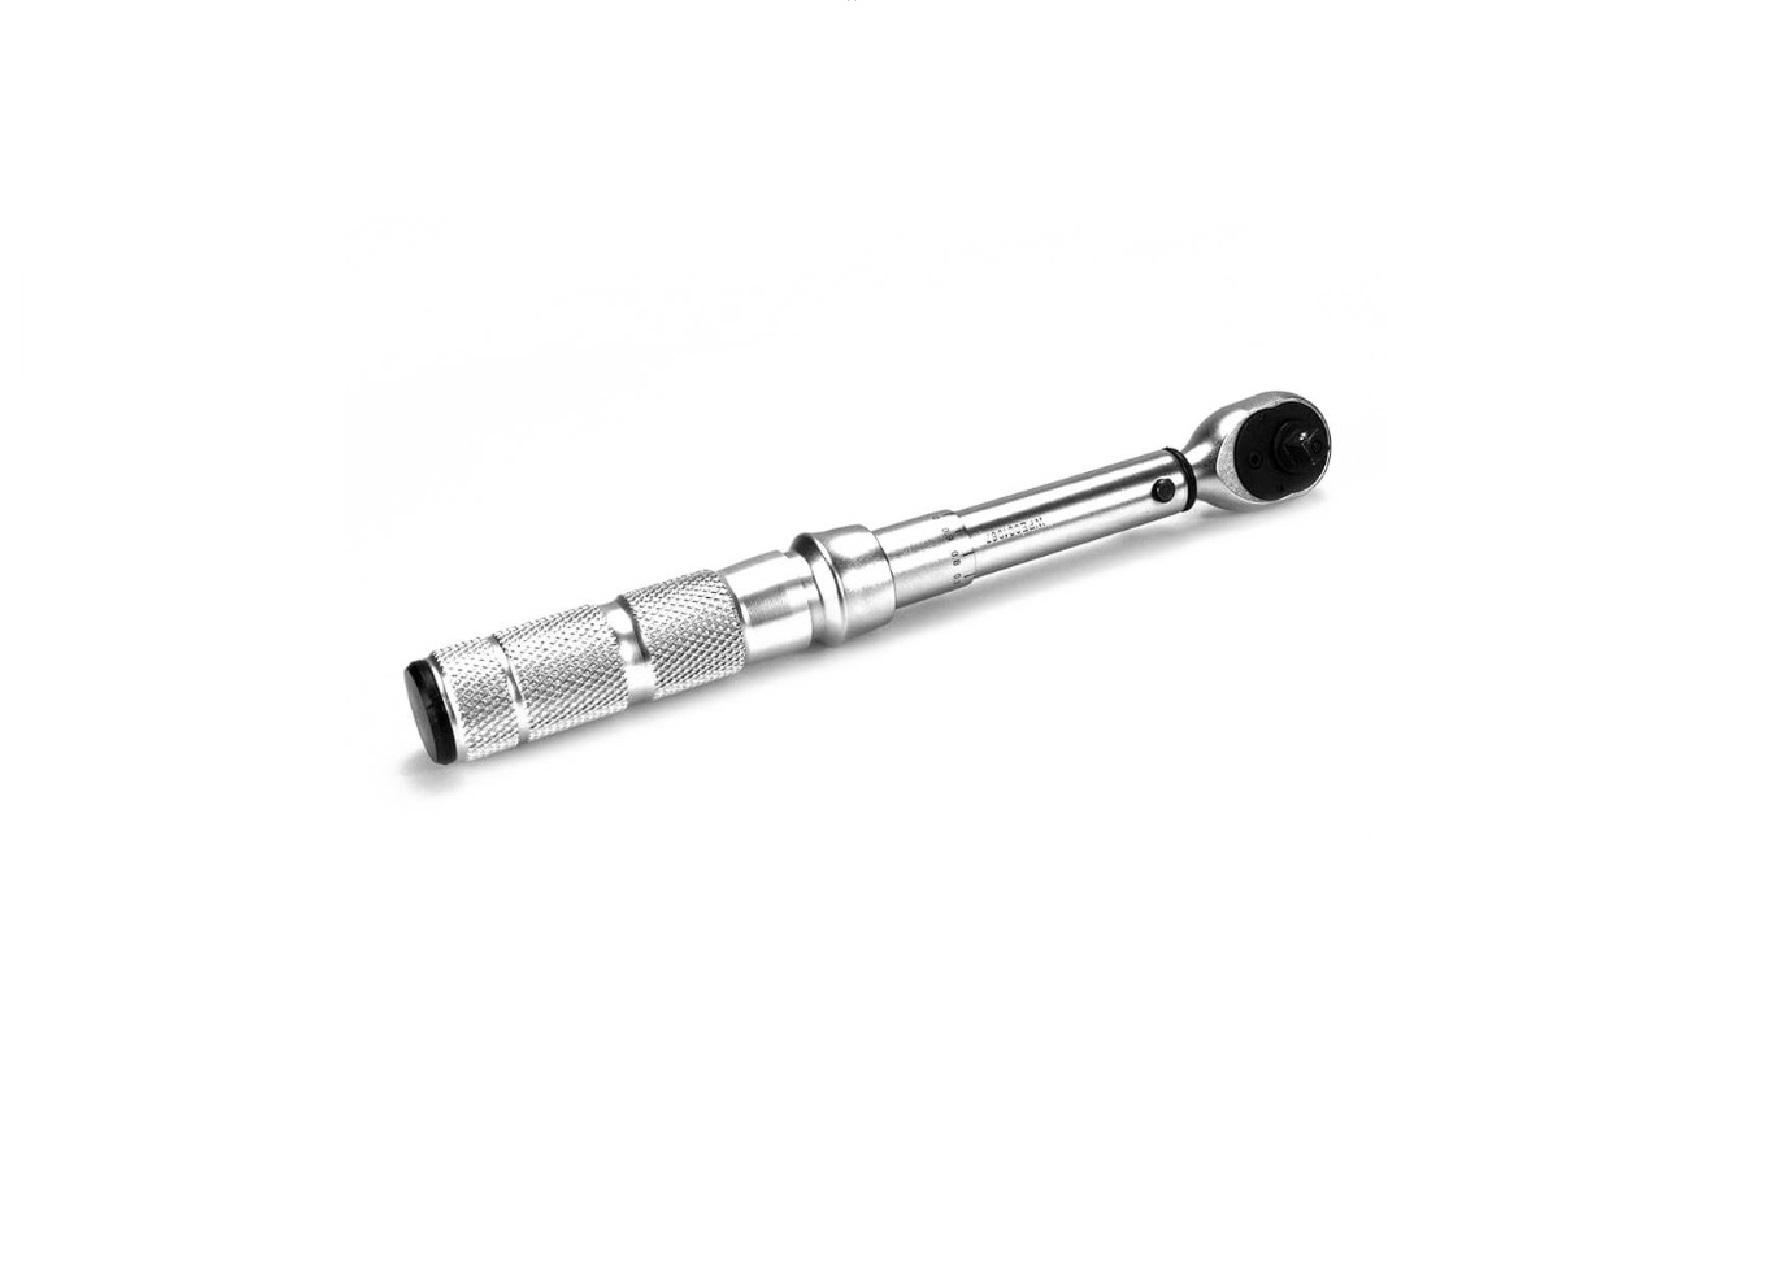 Professional Torque Wrench - 1/4" Drive Clock